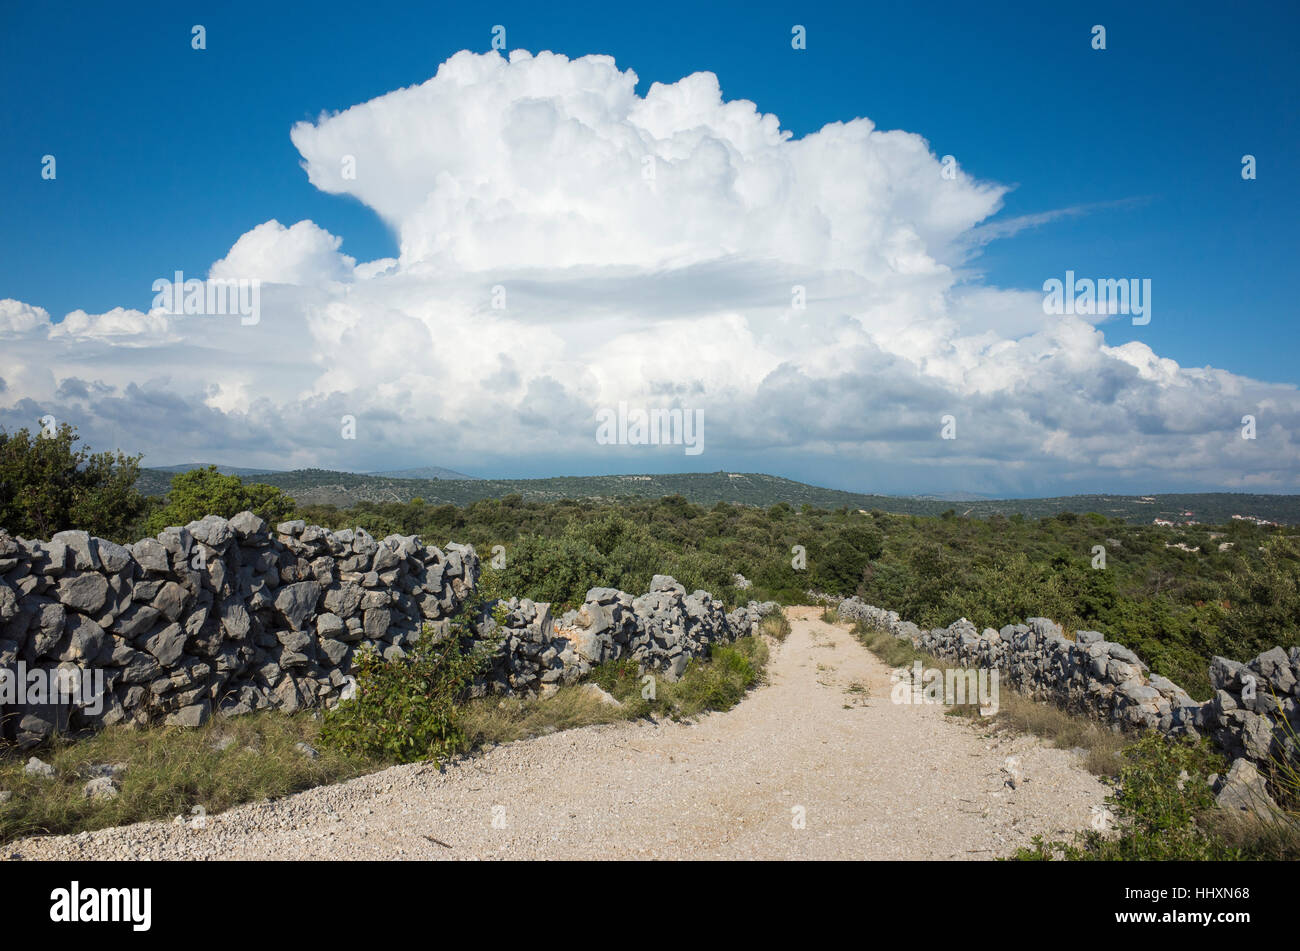 Dalmatia Croatia. Beautiful nature and landscape photo of warm summer day. White clouds and blue sky.Nice happy outdoors image. Stock Photo